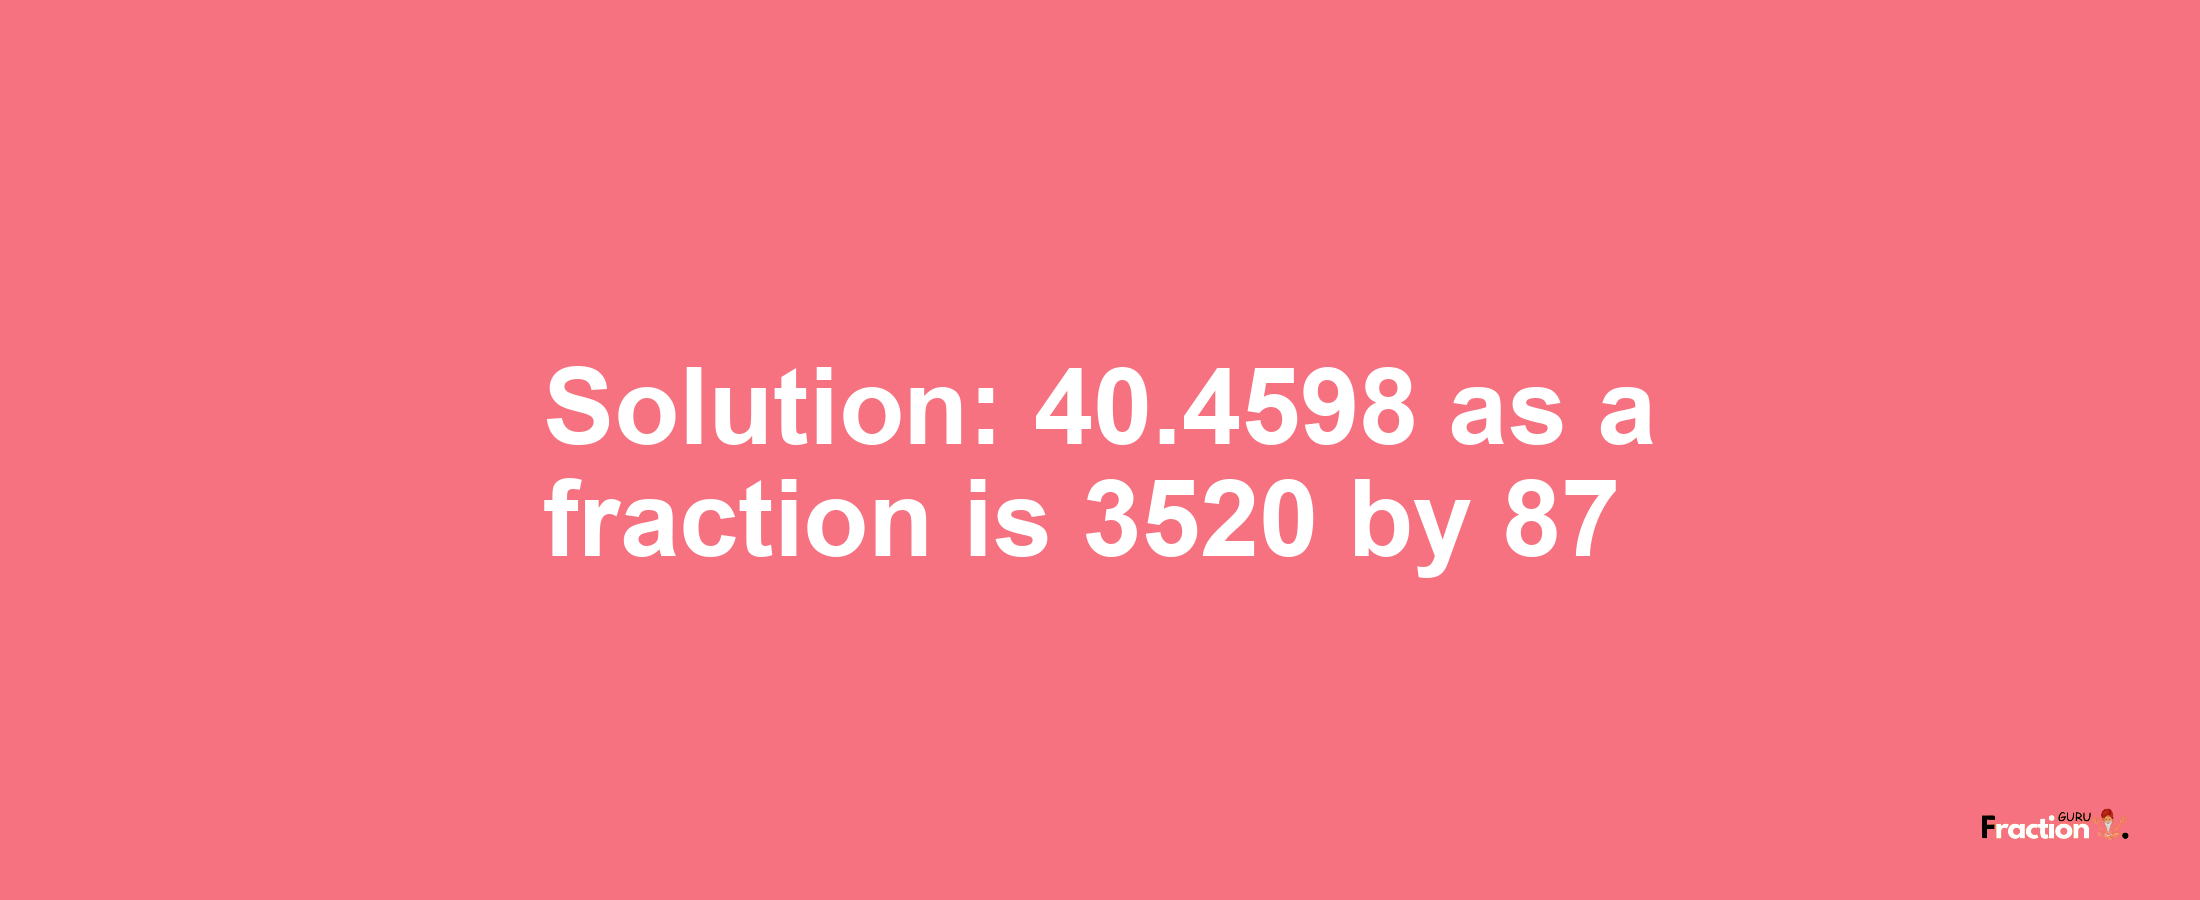 Solution:40.4598 as a fraction is 3520/87